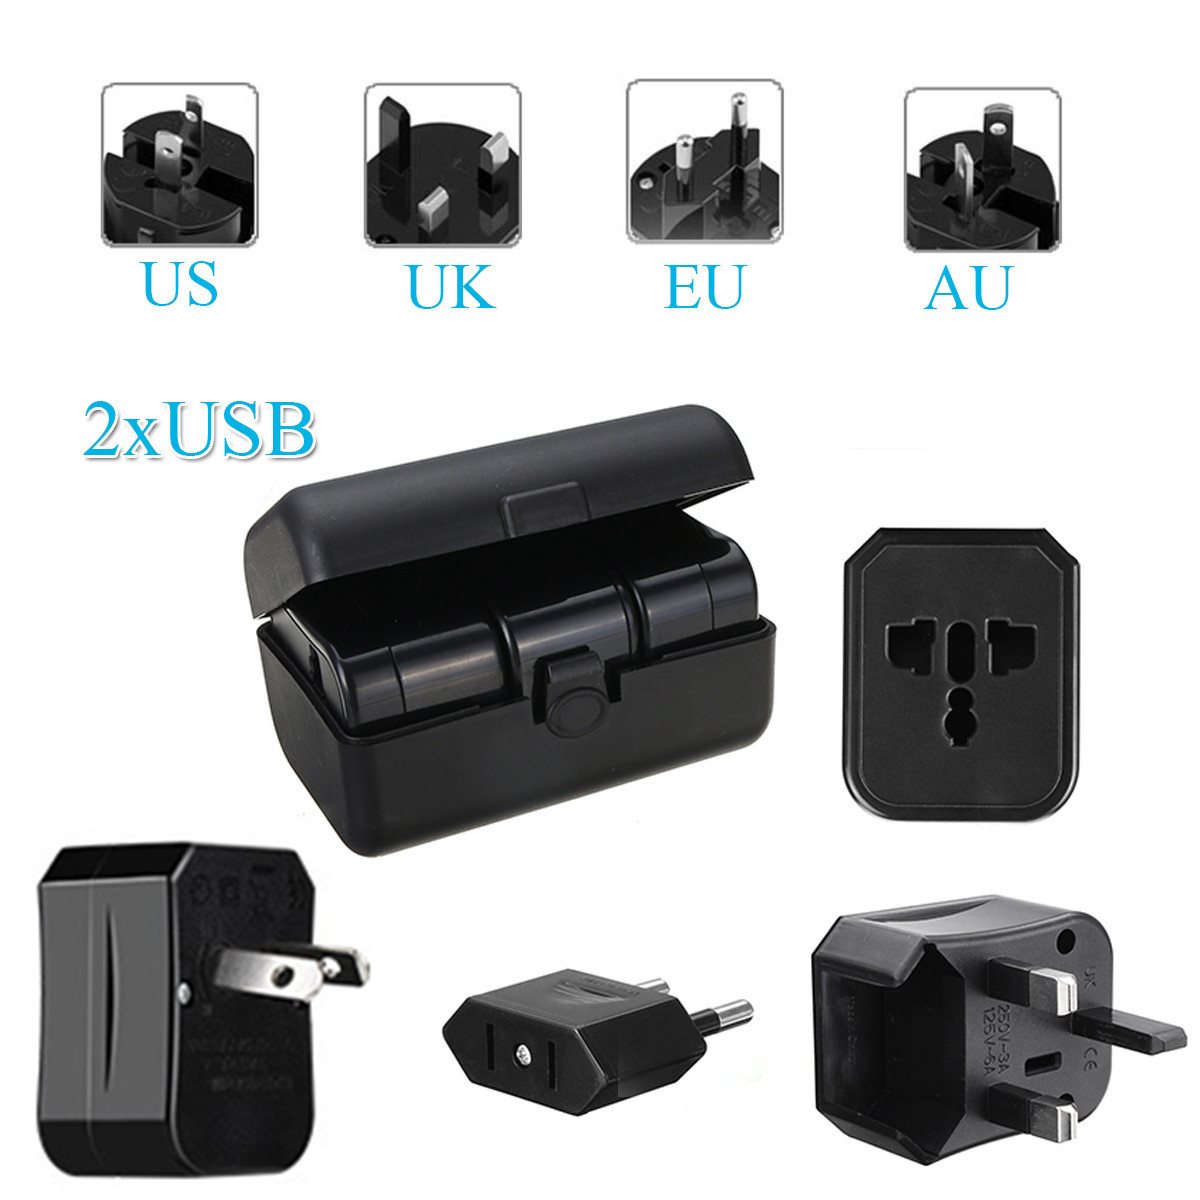 Travel-Adapter-Universal-Power-Adapter-with-2-USB-Ports-Wall-Charger-AC-Power-Plug-1304296-4